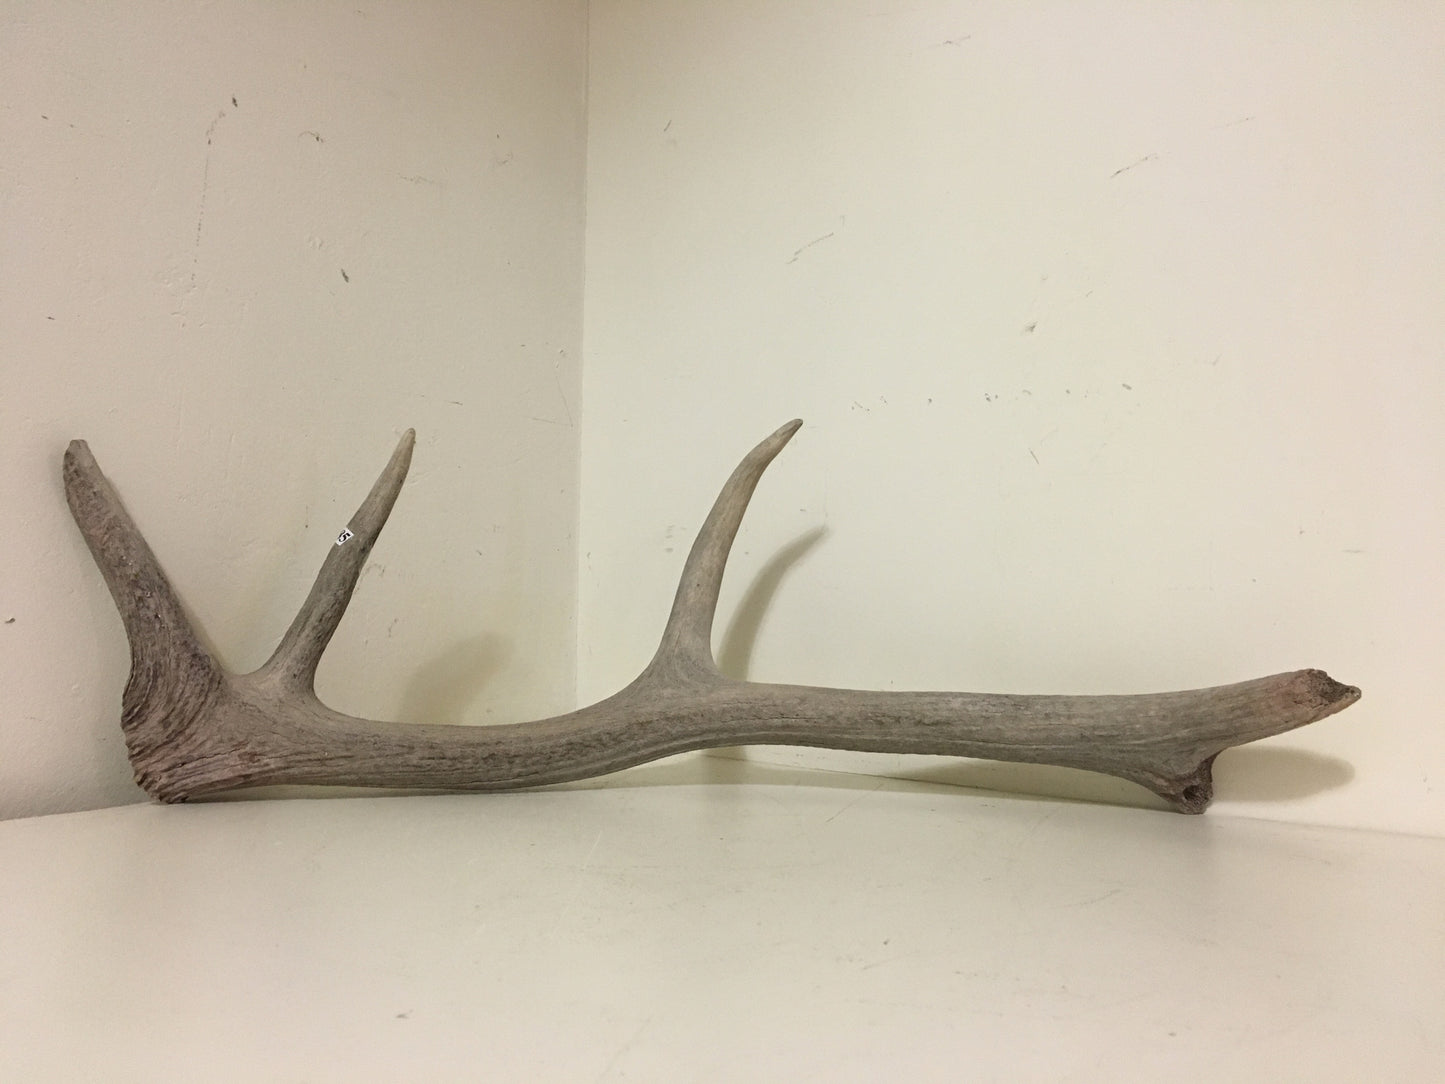 Small Antler